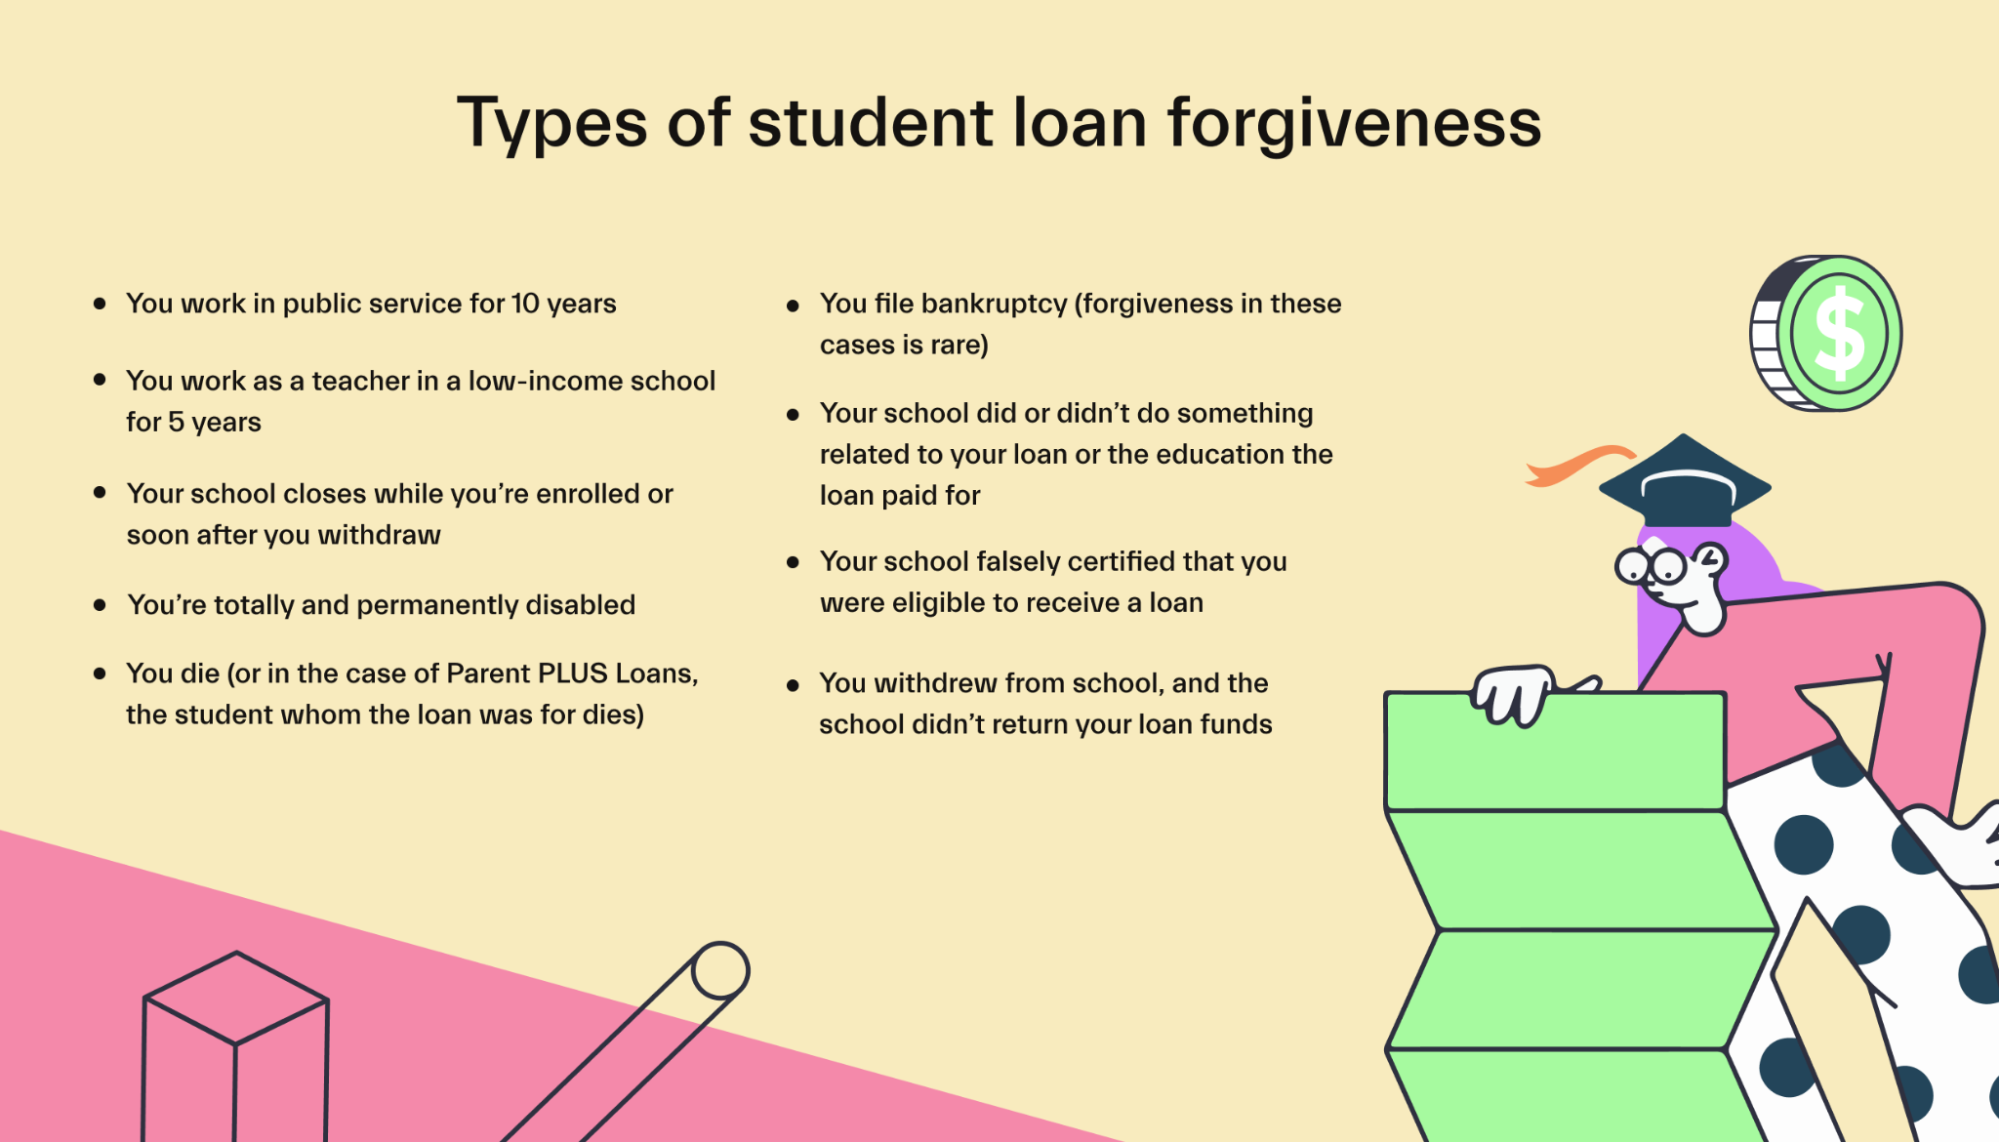 Types of student loan forgiveness